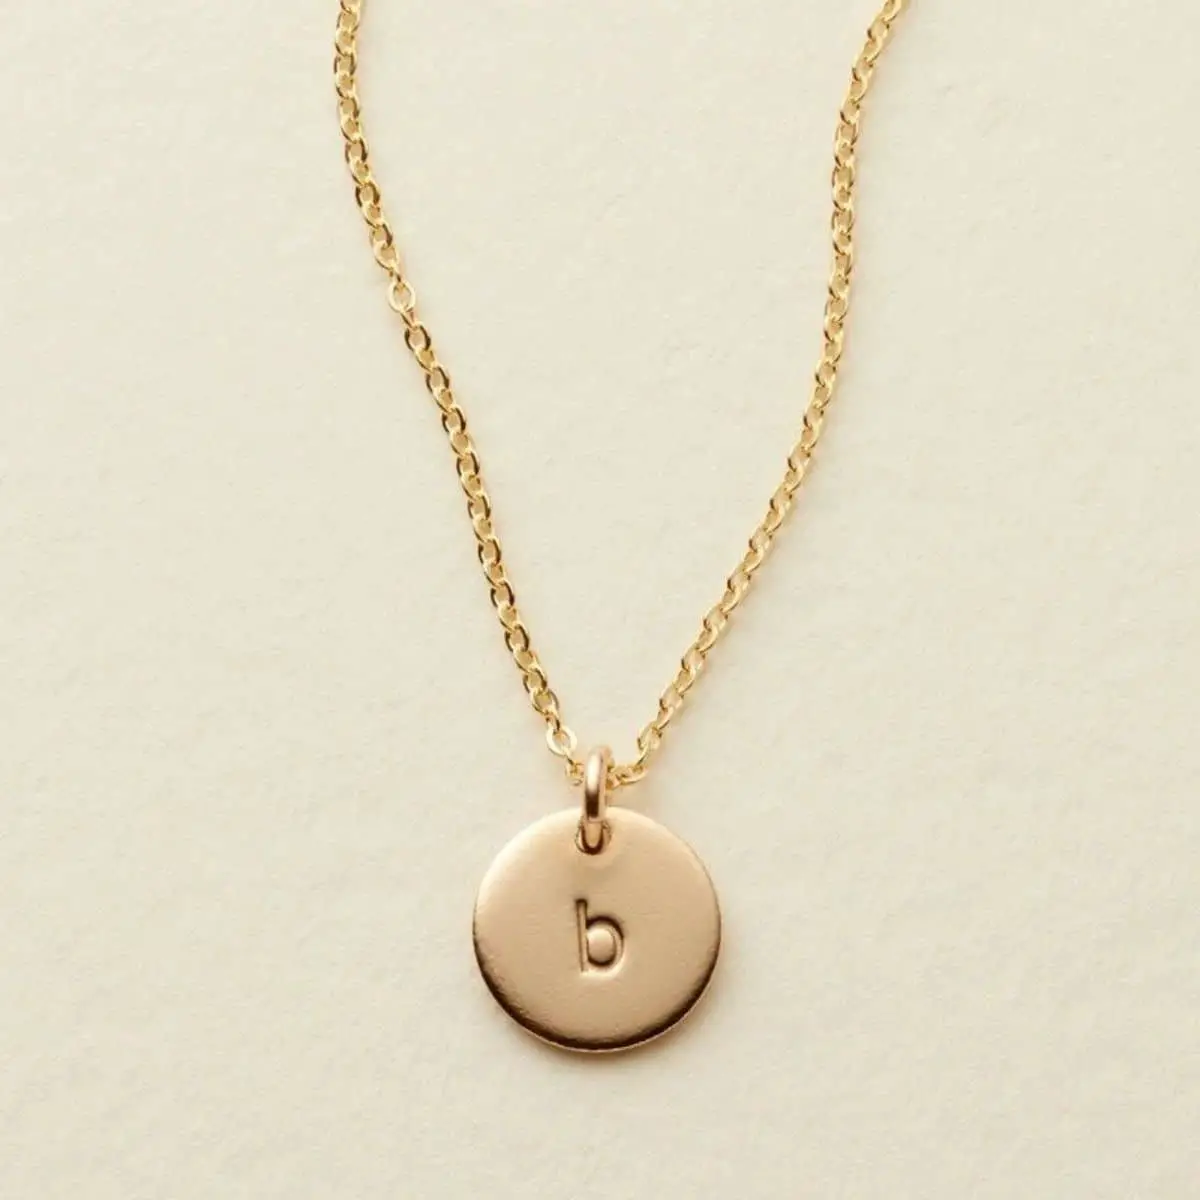 gold personalized initial necklace with the letter b